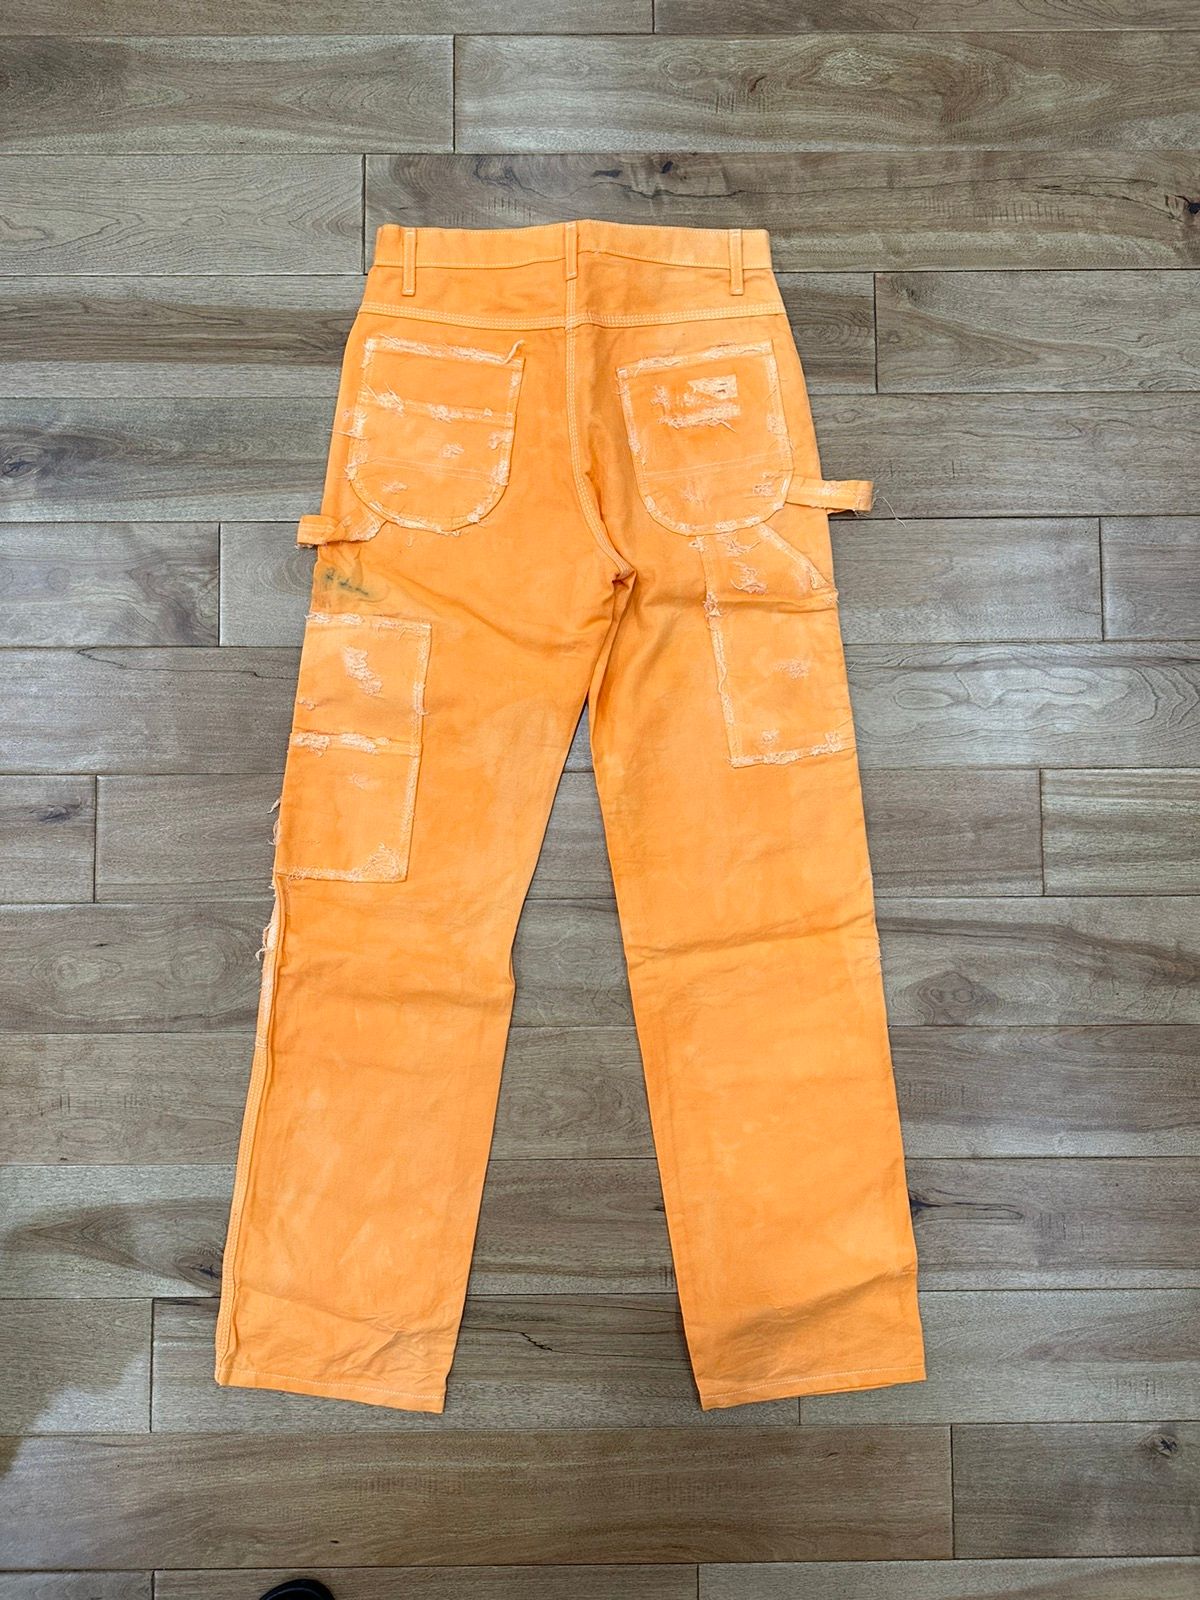 Custom Hand dyed and distressed Dickies Double Knee Pants Size US 30 / EU 46 - 2 Preview